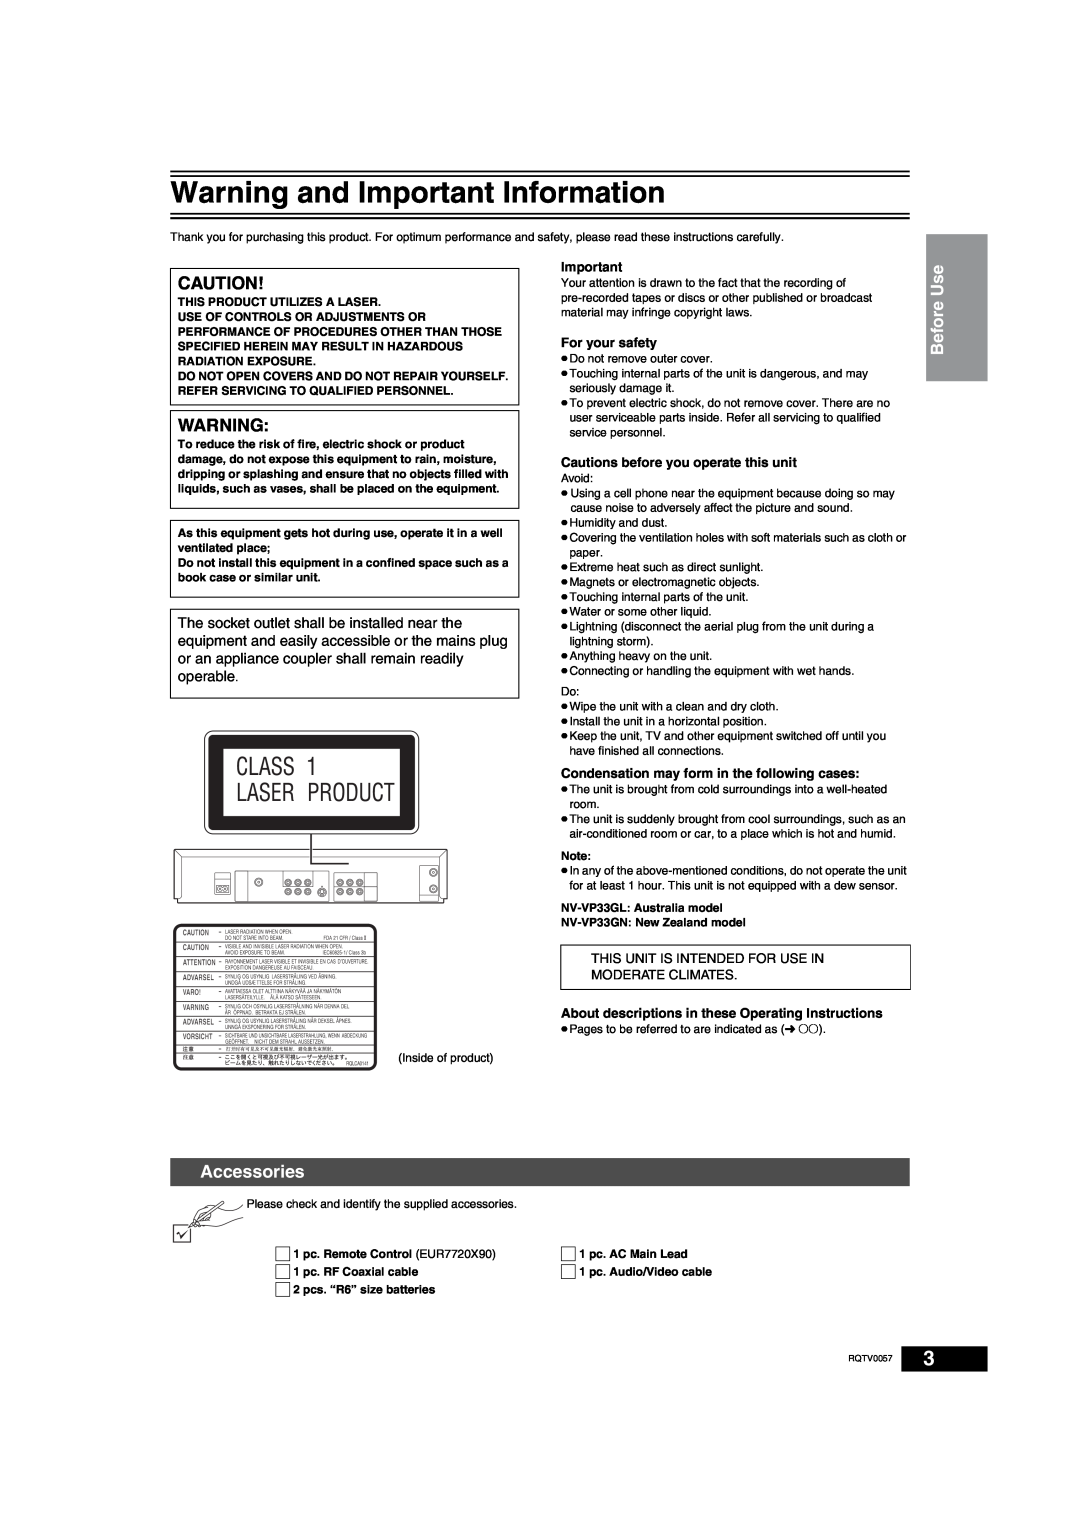 Panasonic NV-VP33 Series operating instructions Warning and Important Information, Accessories, Before Use, For your safety 